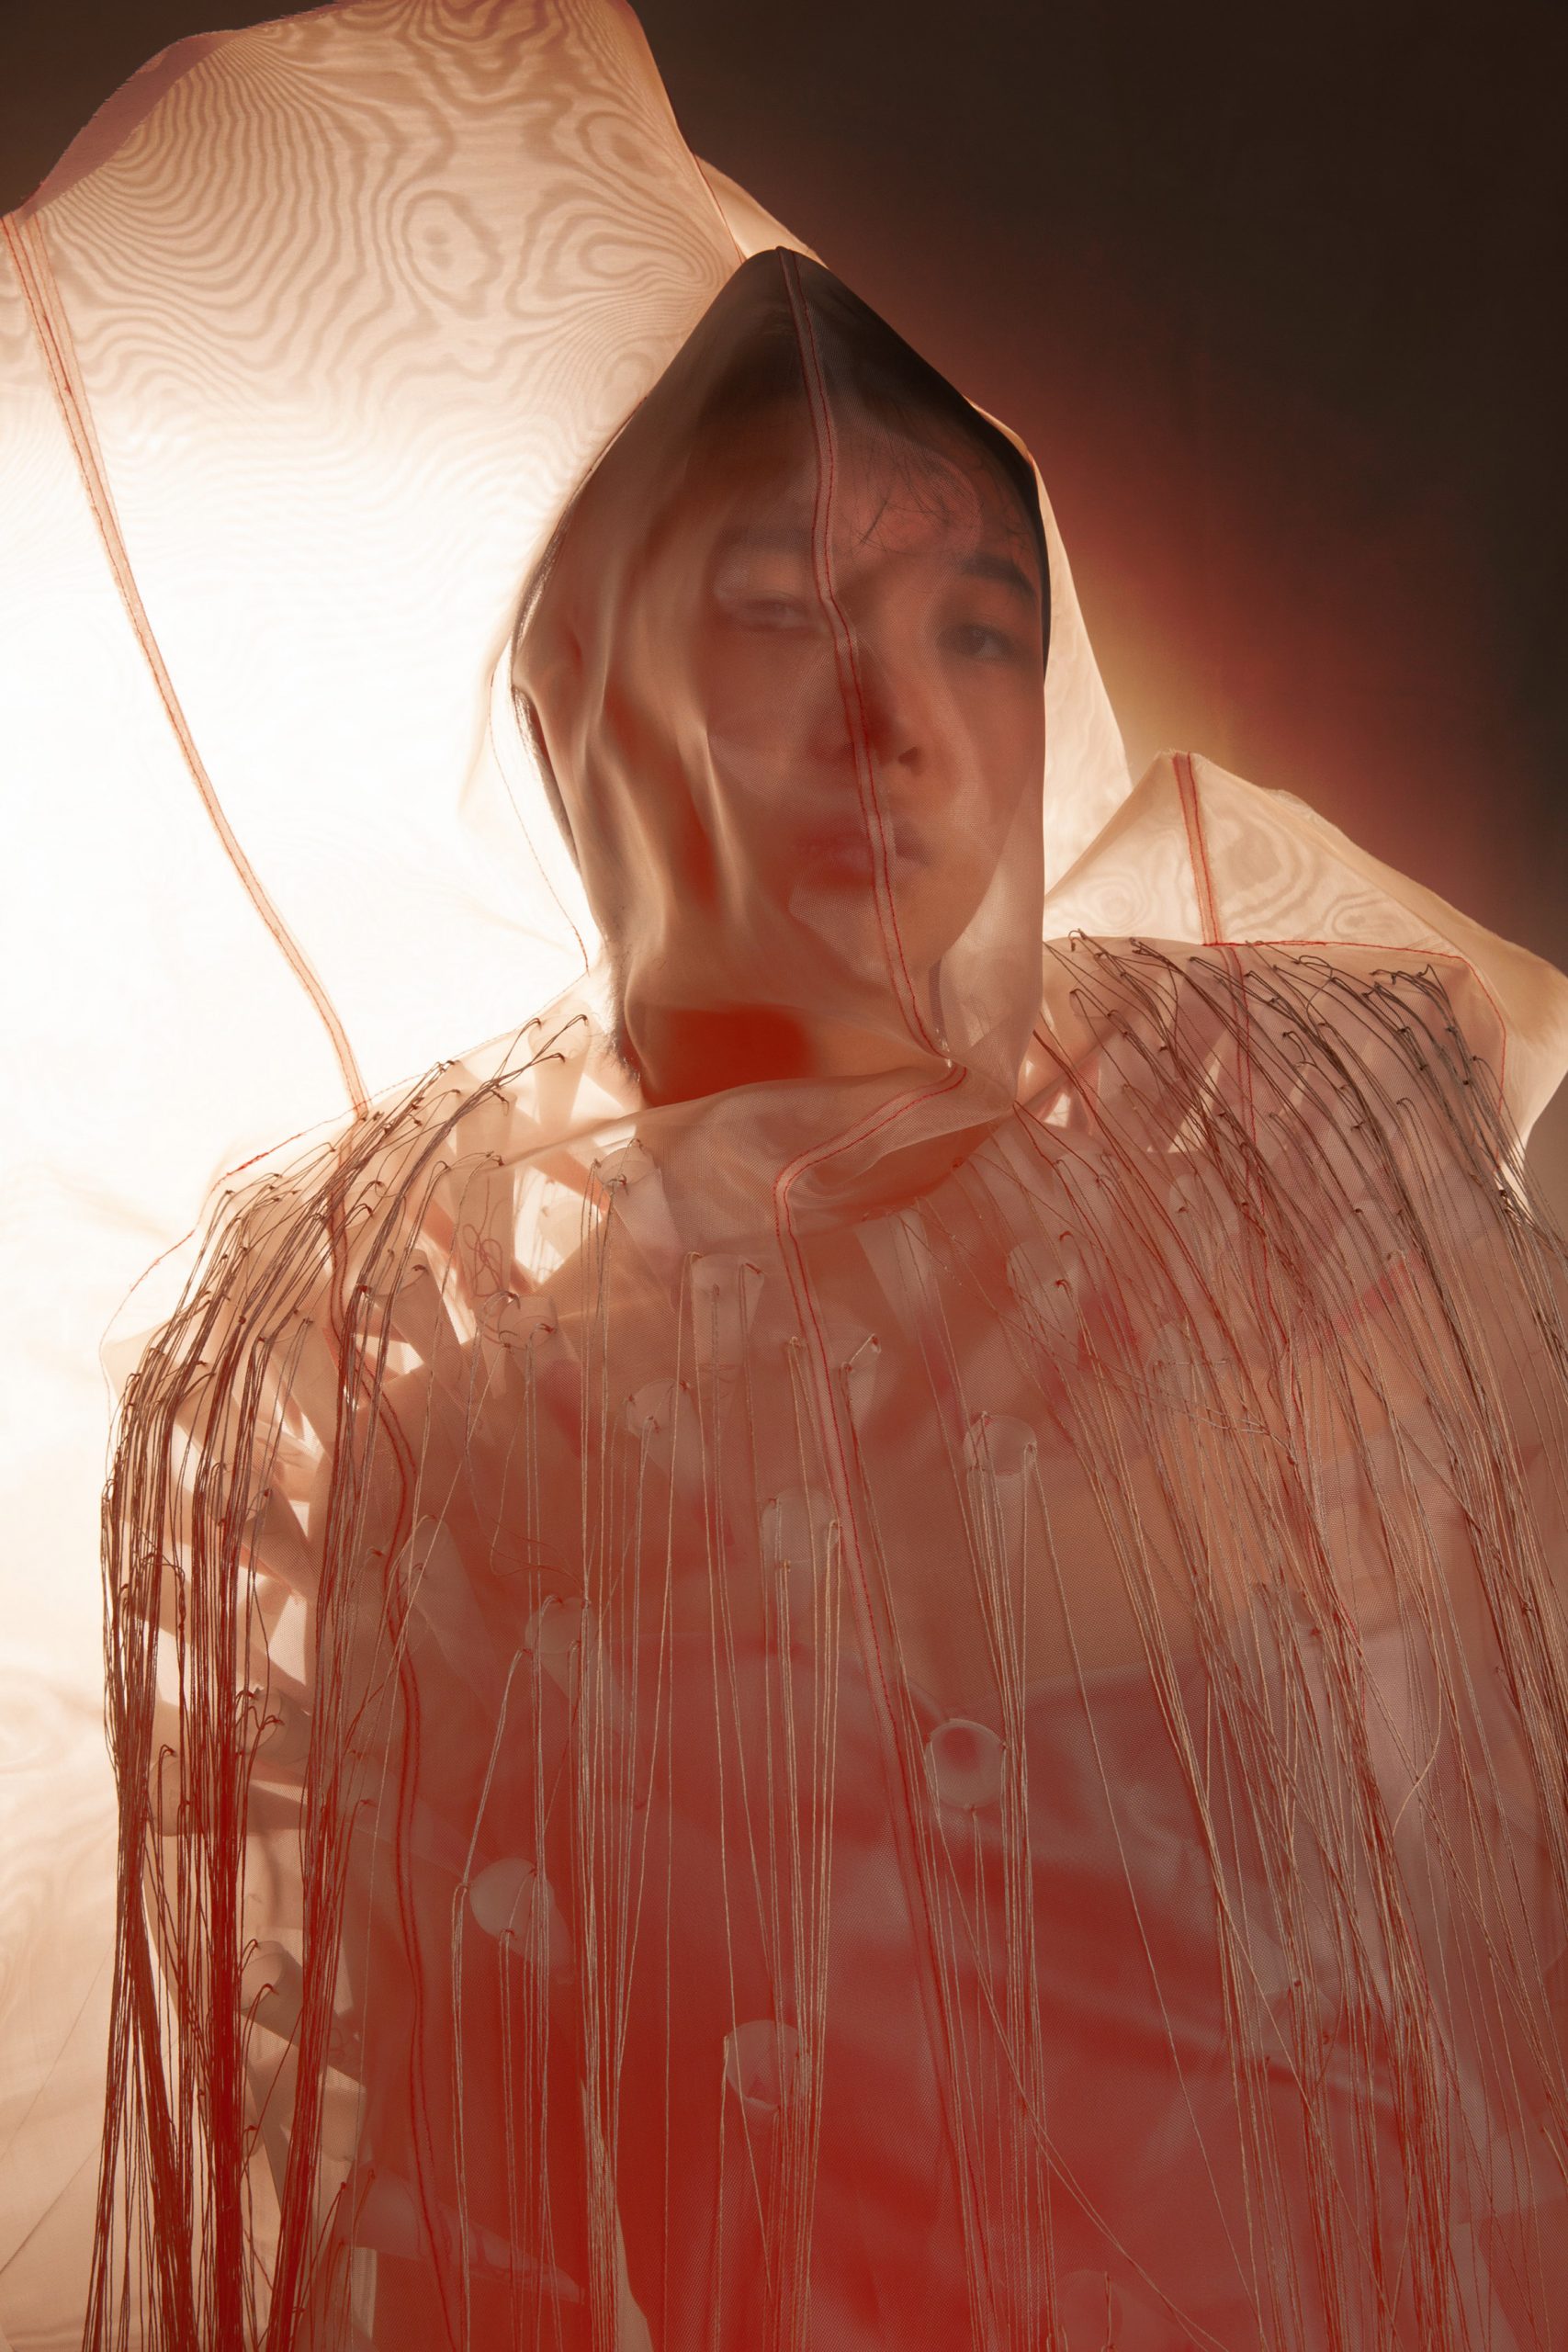 Violet Zhou translates mental states into ethereal fashion collection